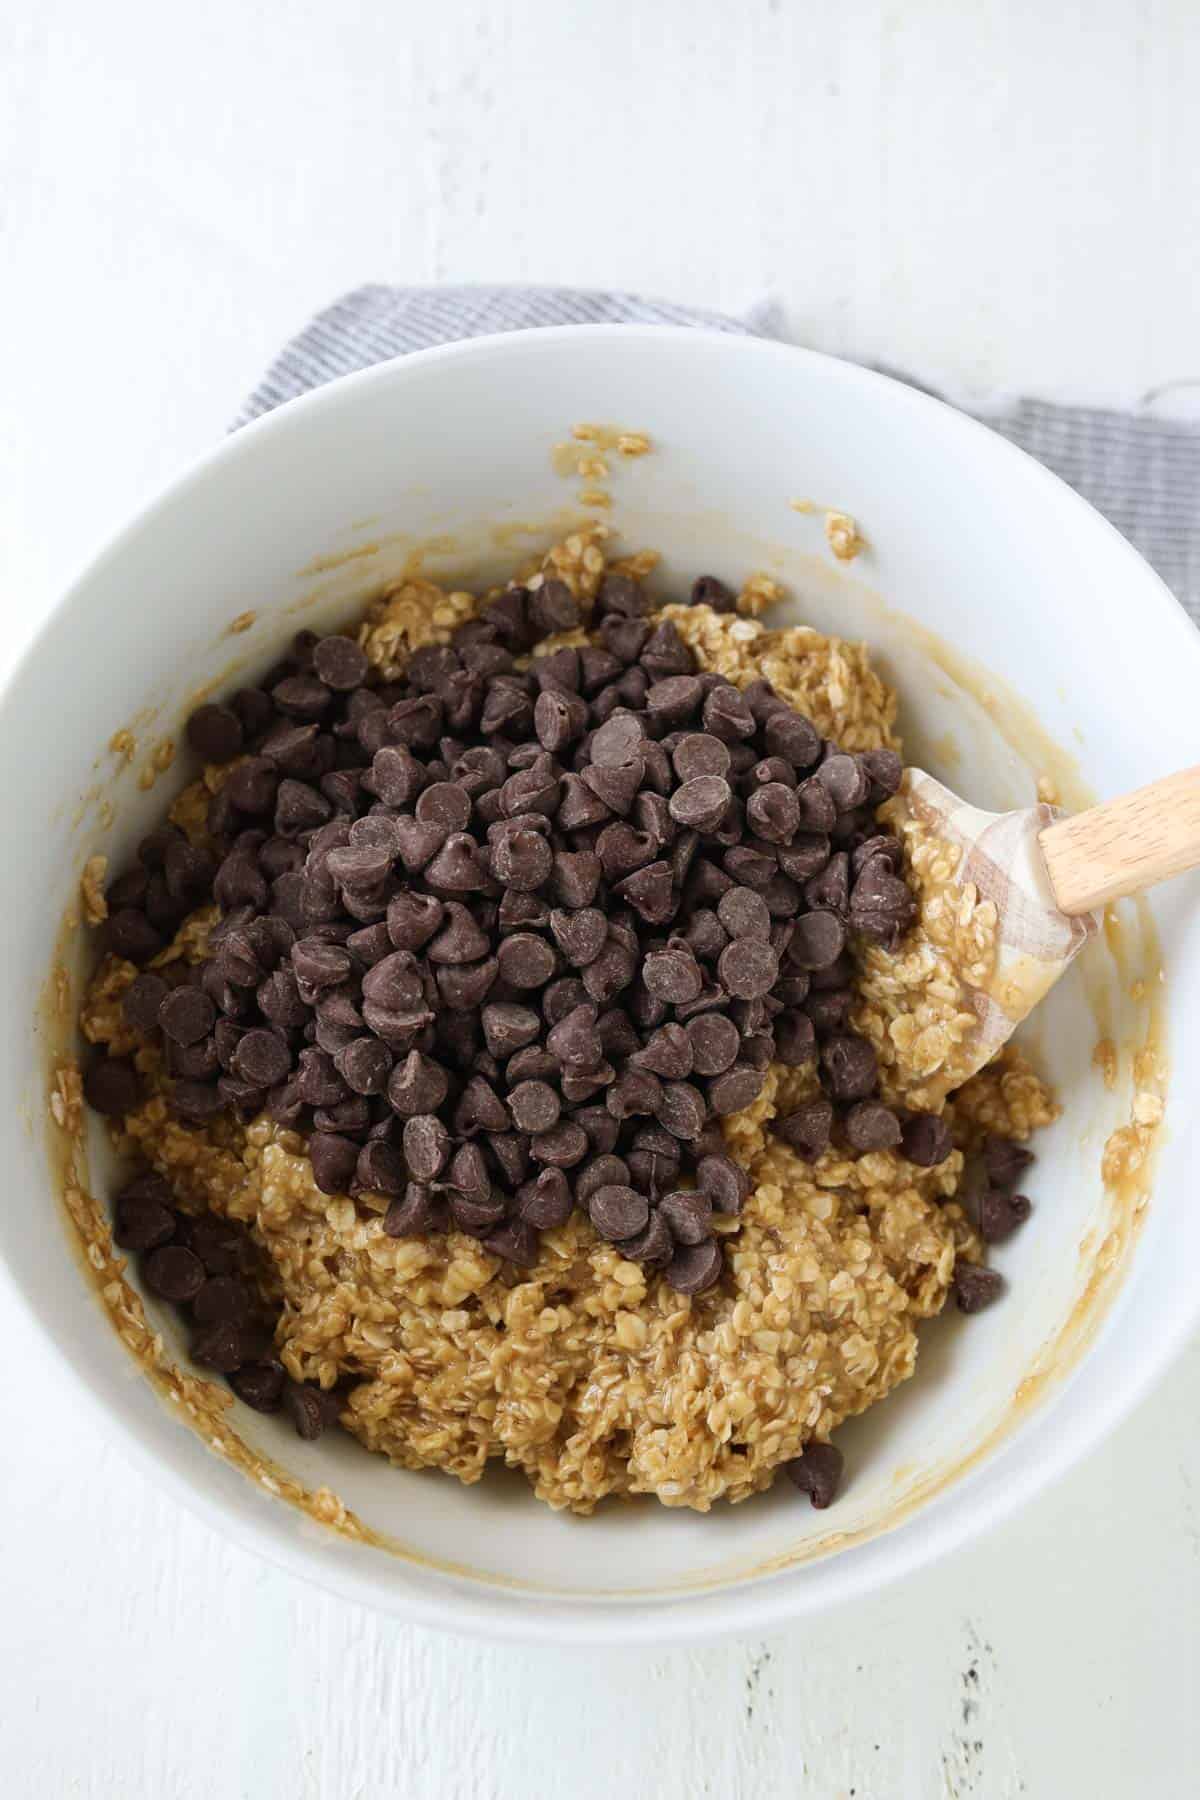 A bowl with oatmeal and chocolate chips.